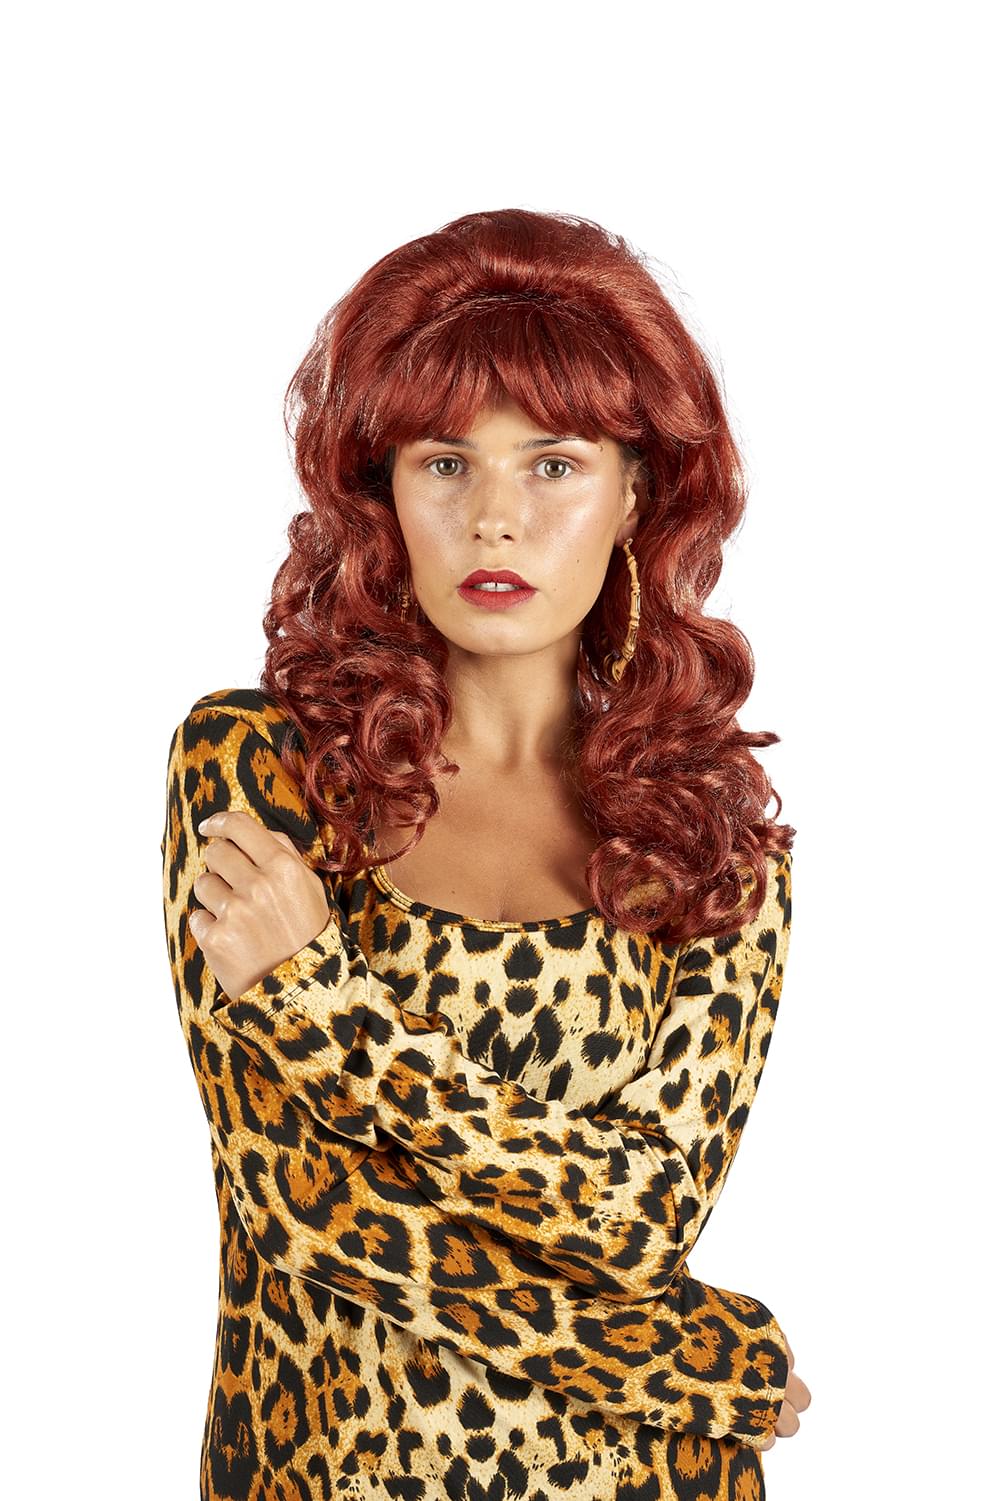 Curly Red Synthetic Wig Costume Accessory for Adults Inspired by Married With Children Peg Bundy| One Size Fits Most